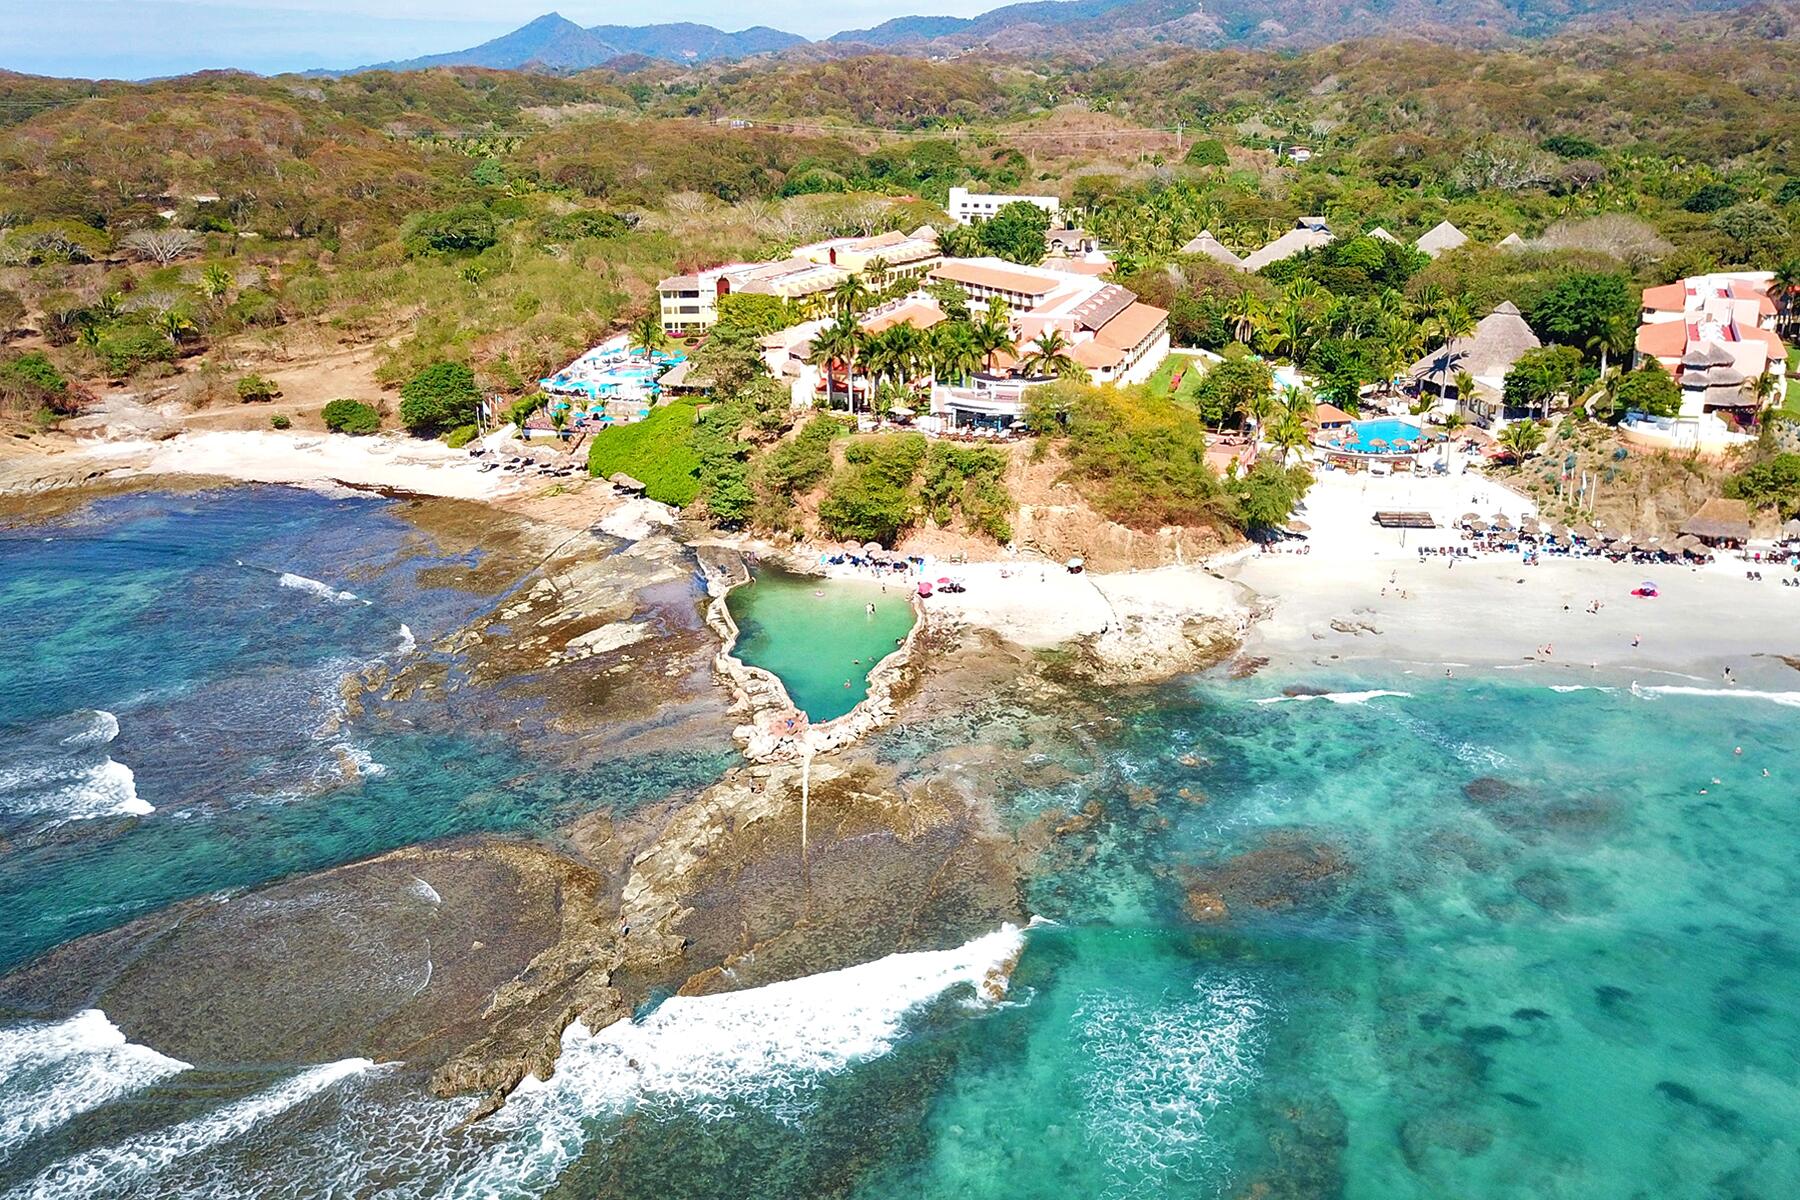 <a href='https://www.fodors.com/world/mexico-and-central-america/mexico/experiences/news/photos/overcrowded-or-overrated-destinations-in-mexico-and-where-to-go-instead#'>From &quot;Avoid These 5 Crowded Mexican Hotspots. Go Here Instead: Live the Luxe Life in Punta de Mita, Riviera Nayarit Instead of Los Cabos&quot;</a>